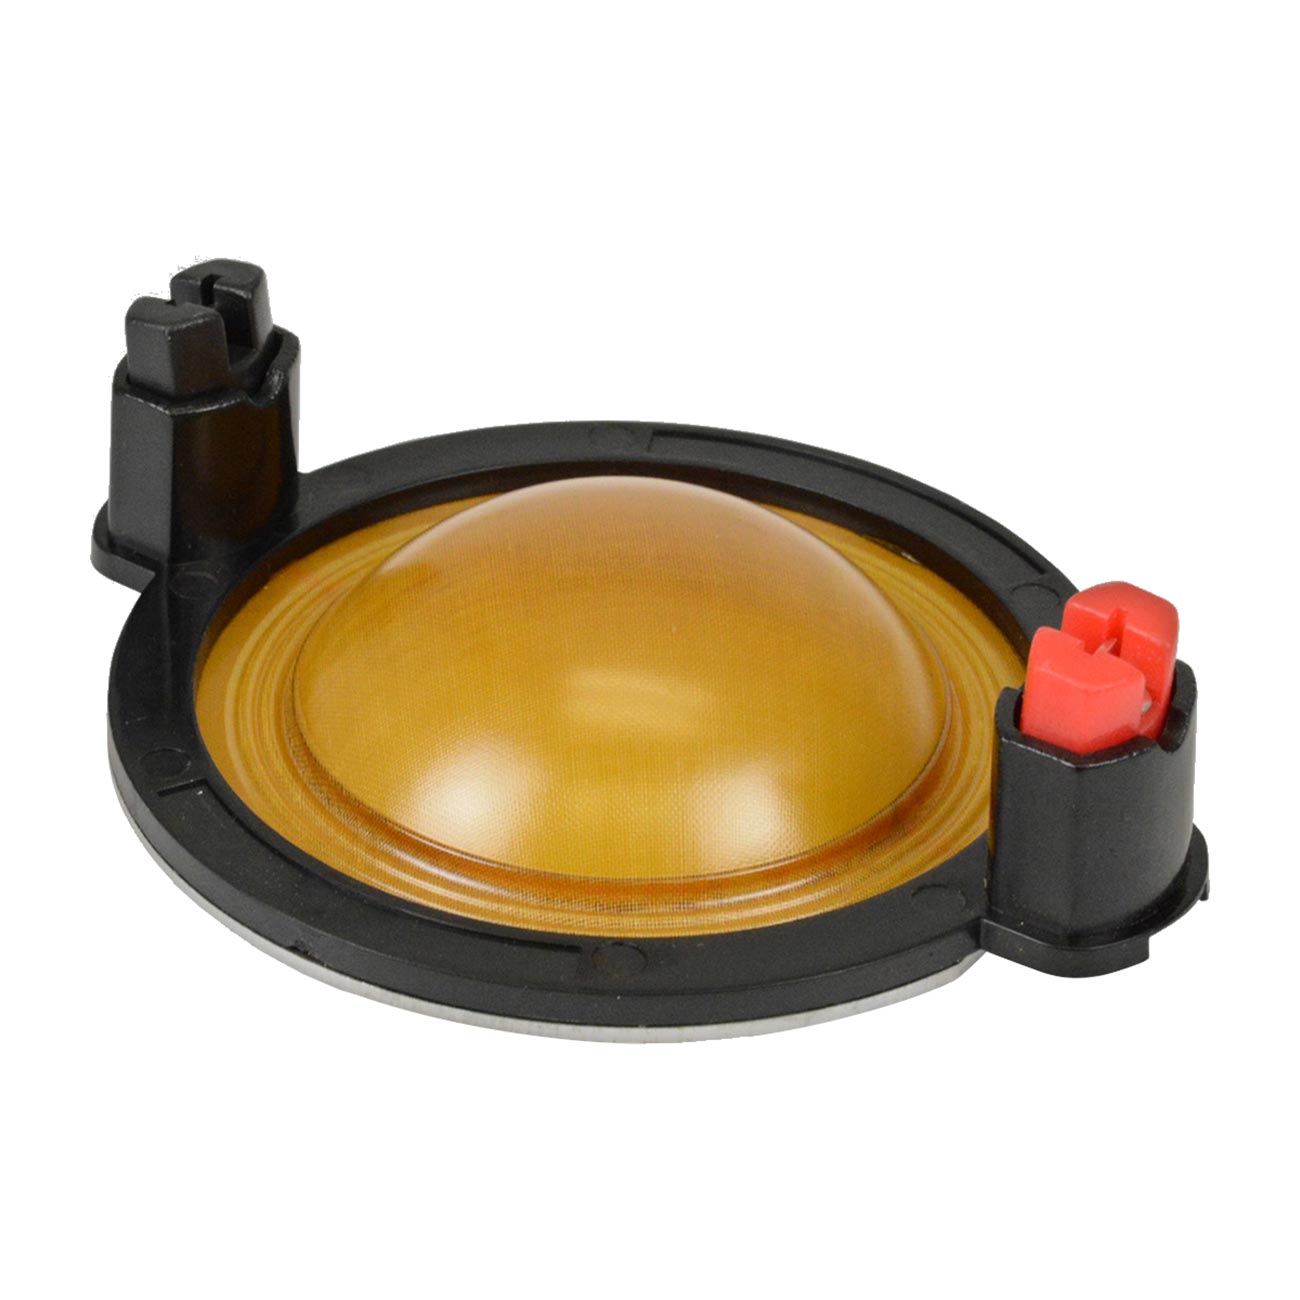 Audiopipe Replacement Kapton Voice Coil for ADR250 Compression Driver